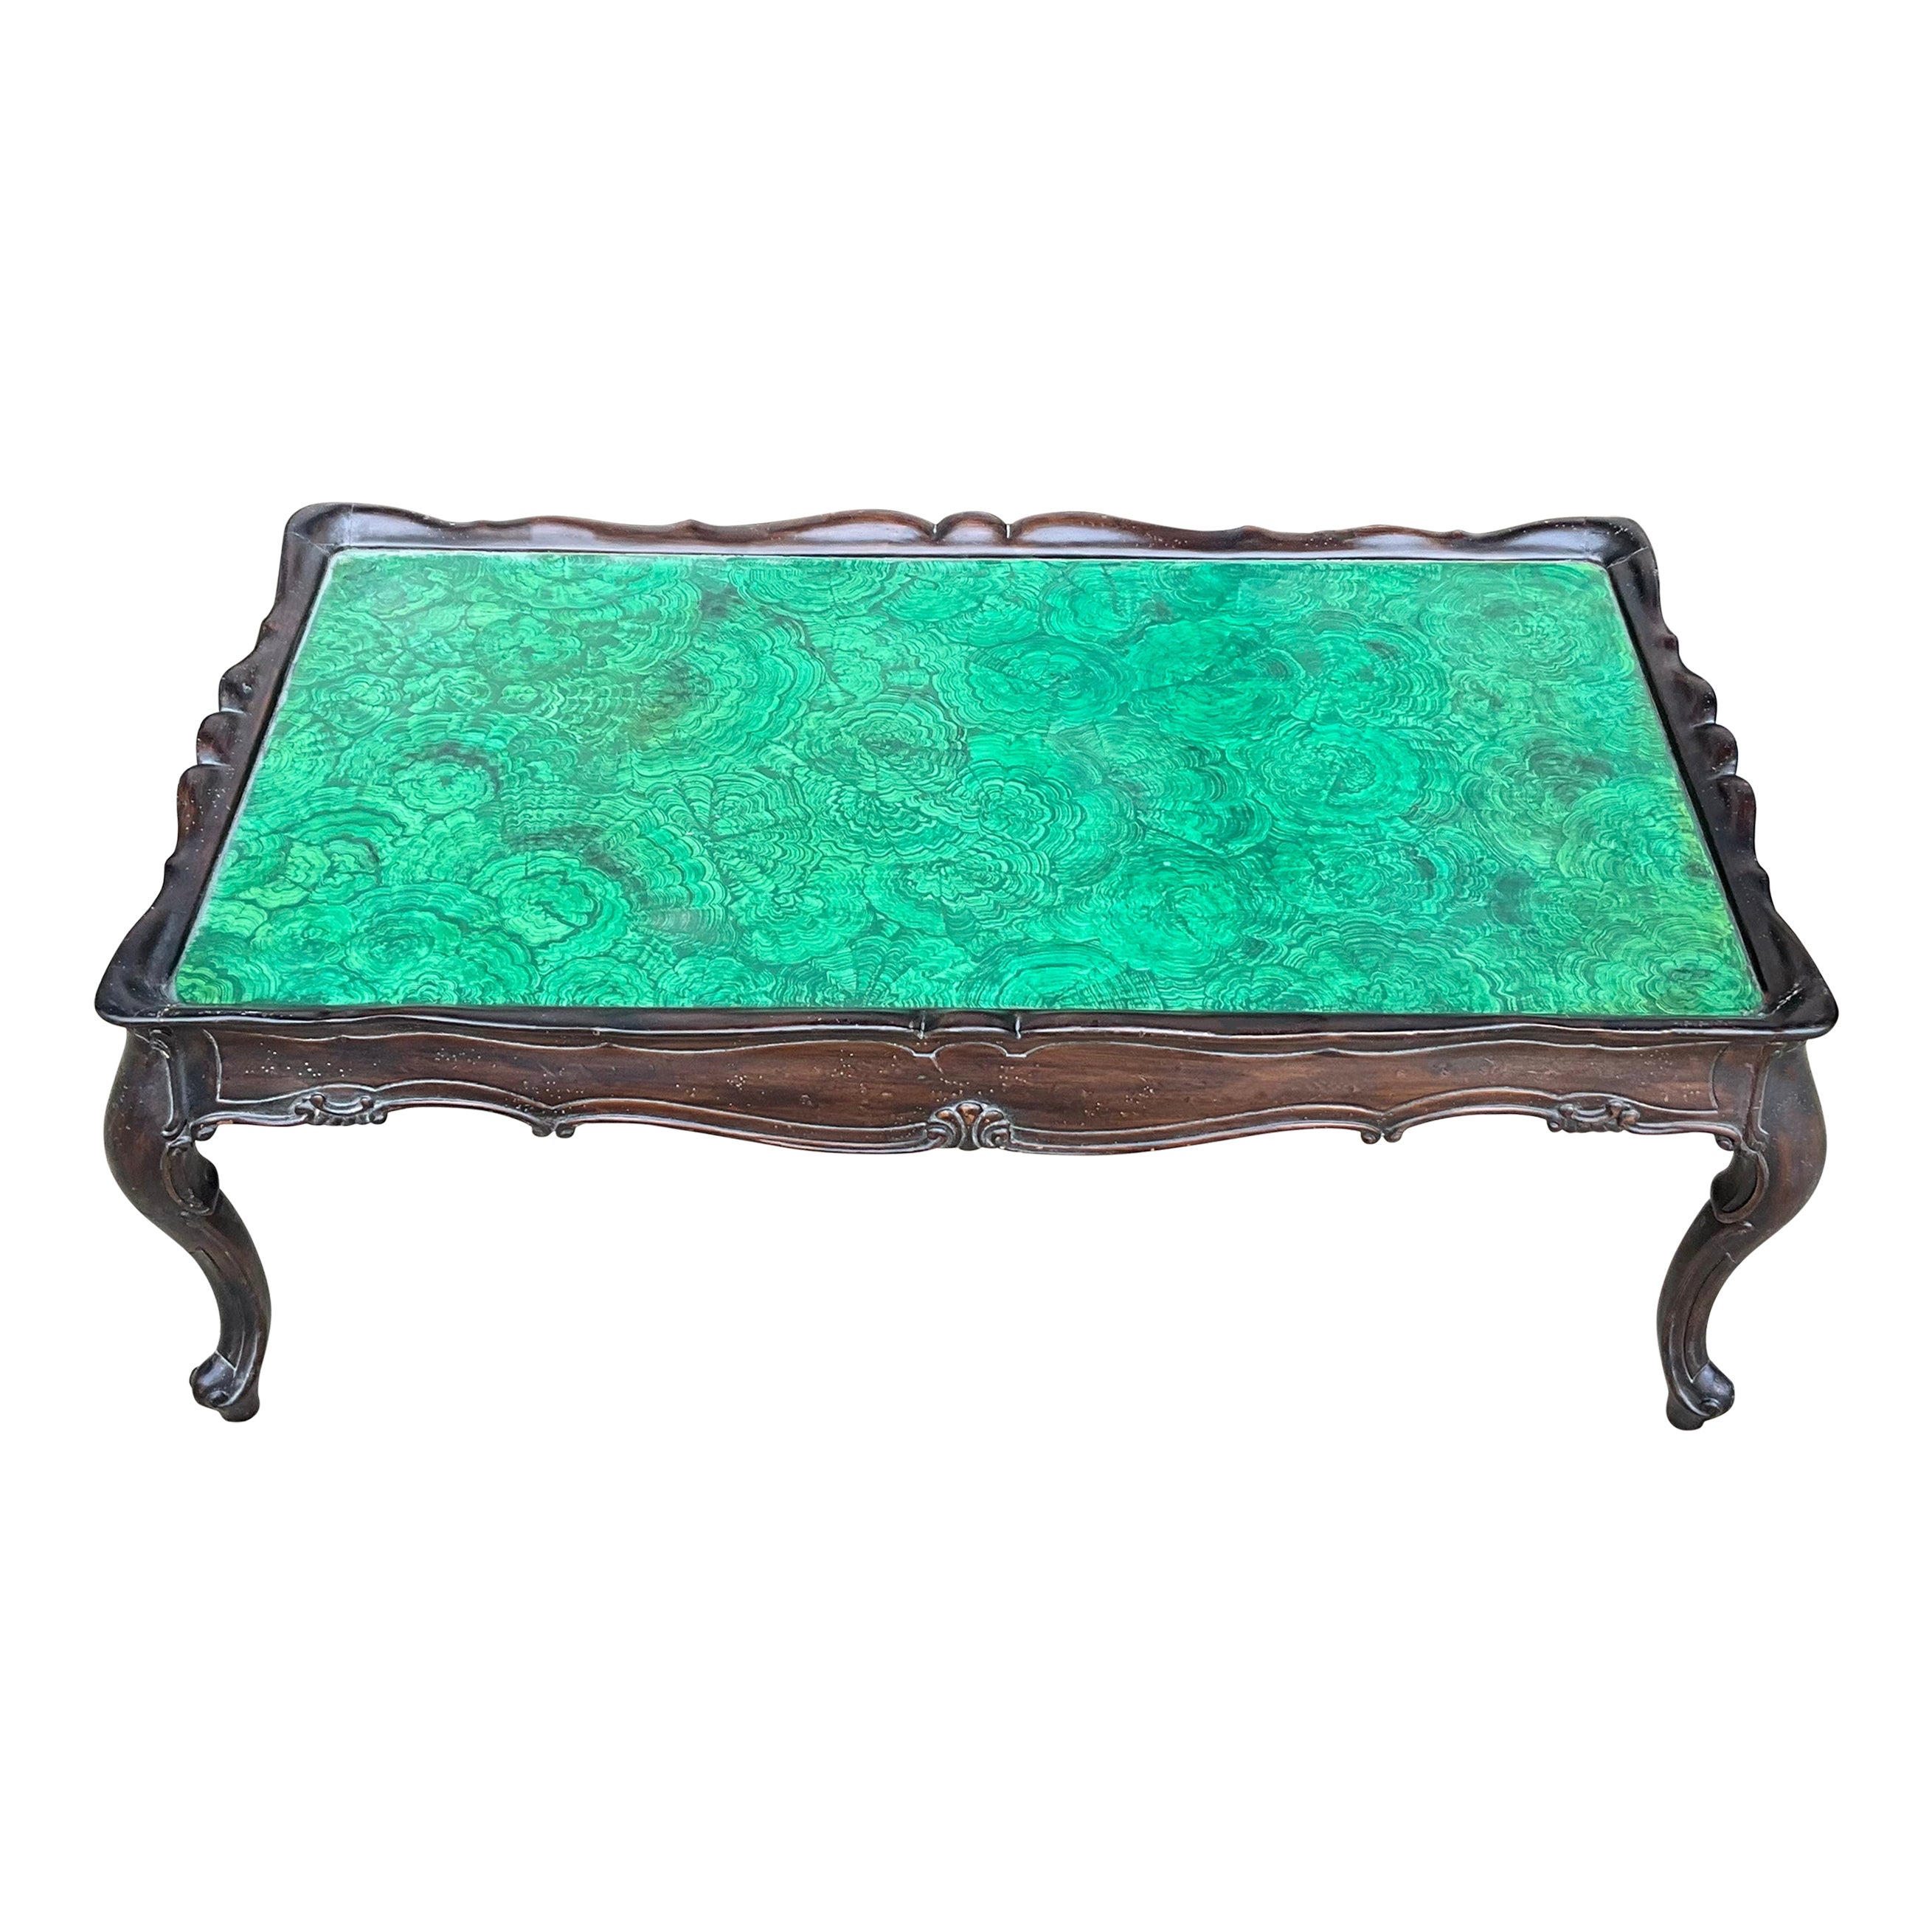 1960s Hollywood Regency Italian Rococo Style Faux Malachite Coffee Table  For Sale